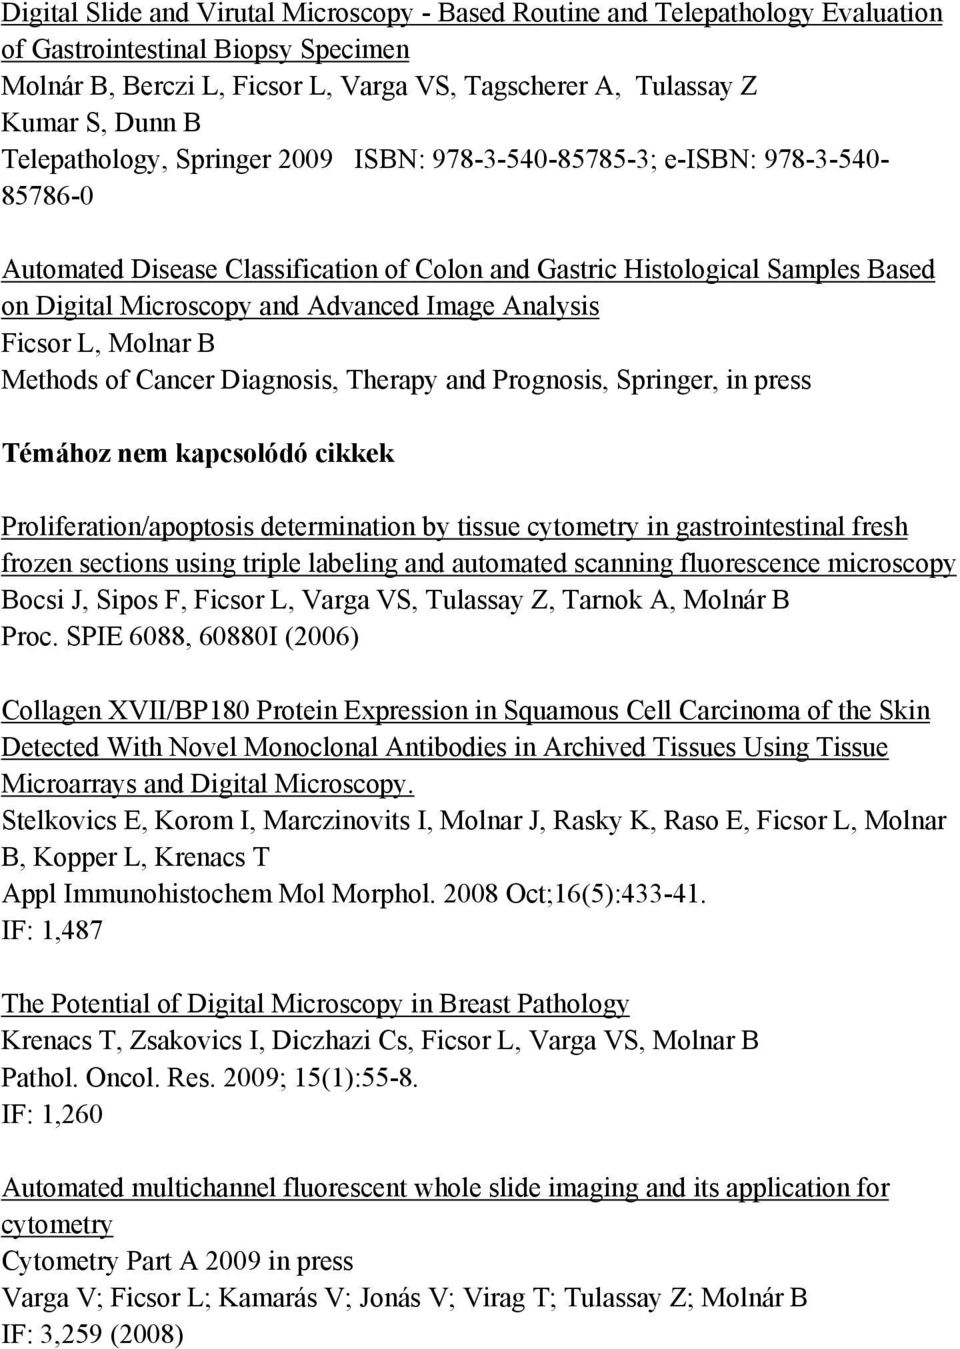 Image Analysis Ficsor L, Molnar B Methods of Cancer Diagnosis, Therapy and Prognosis, Springer, in press Témához nem kapcsolódó cikkek Proliferation/apoptosis determination by tissue cytometry in